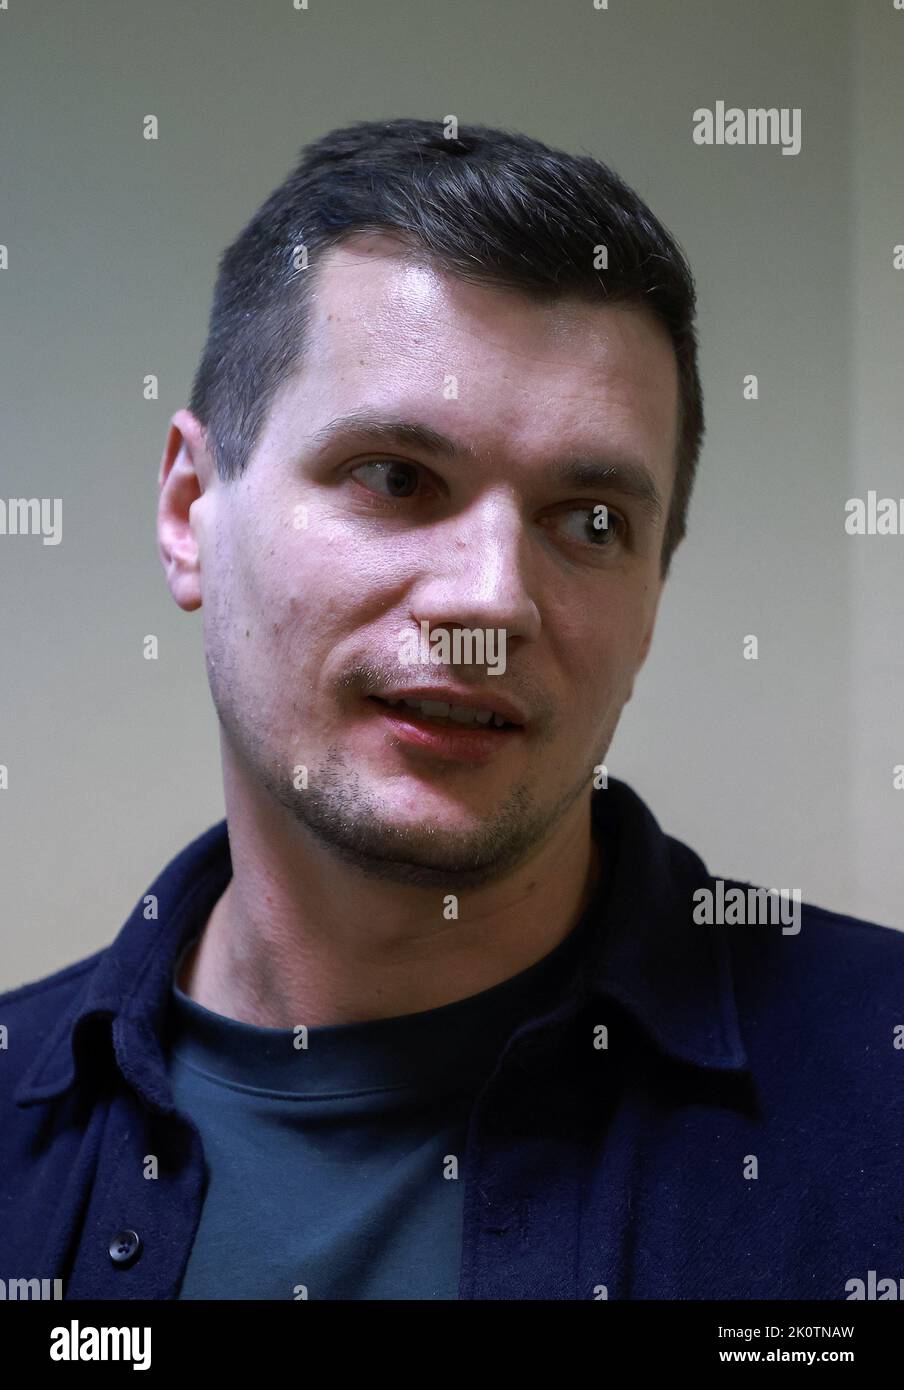 Member of the Smolninskoye municipality council Dmitry Palyuga, who was fined for public activity aimed at discrediting the Russian authorities amid Russia-Ukraine conflict, reacts inside a court building after a hearing in Saint Petersburg, Russia September 13, 2022. REUTERS/REUTERS PHOTOGRAPHER Stock Photo